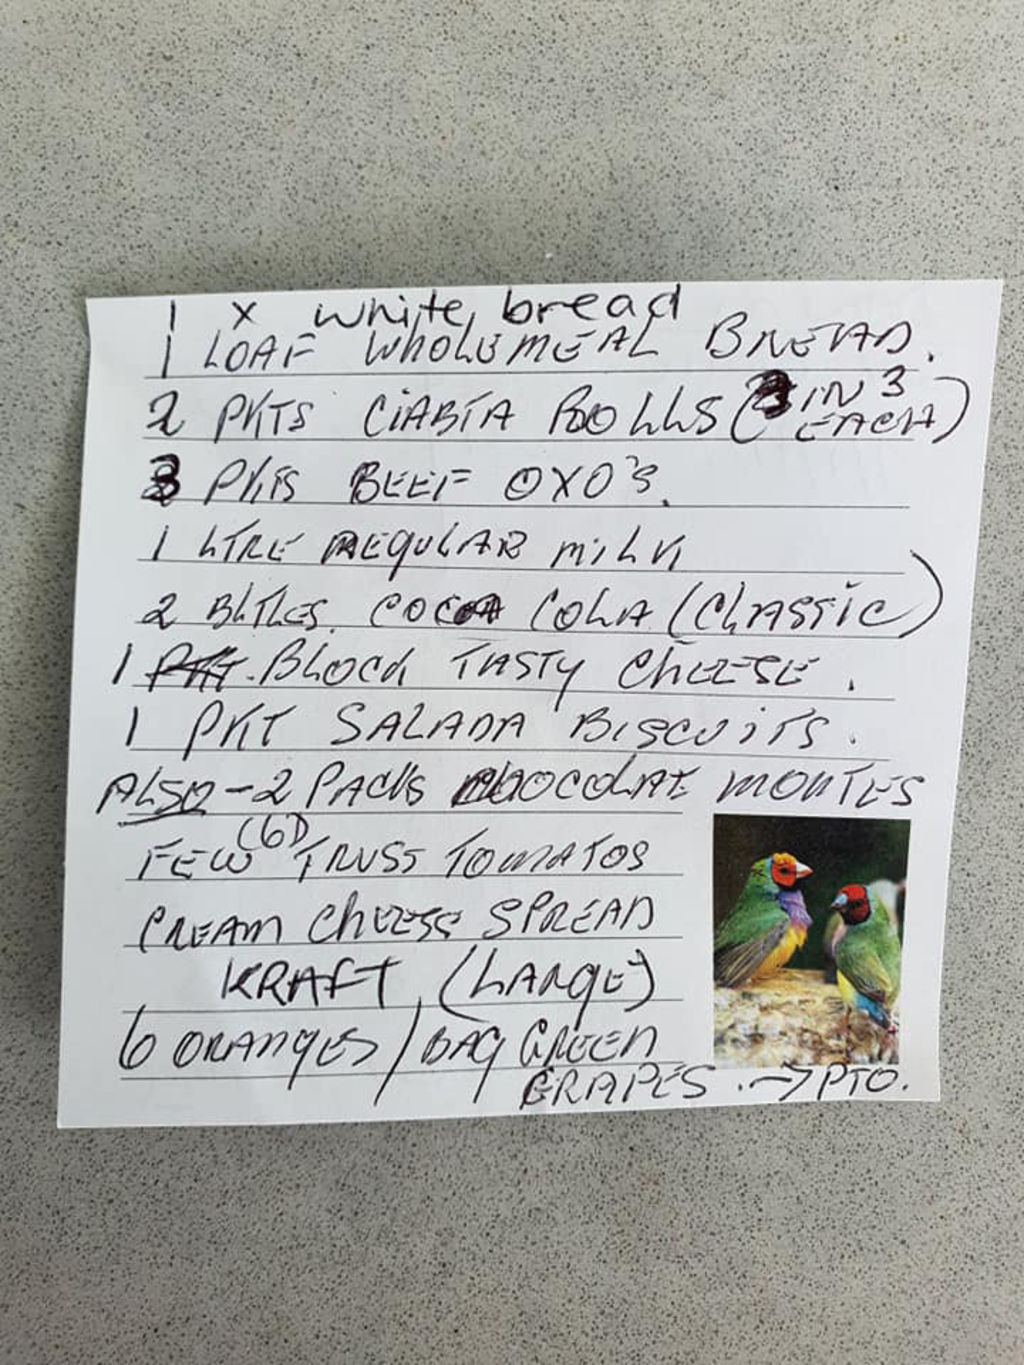 Forget text messages, Margaret’s handwritten grocery list still does the trick. Photo: Supplied